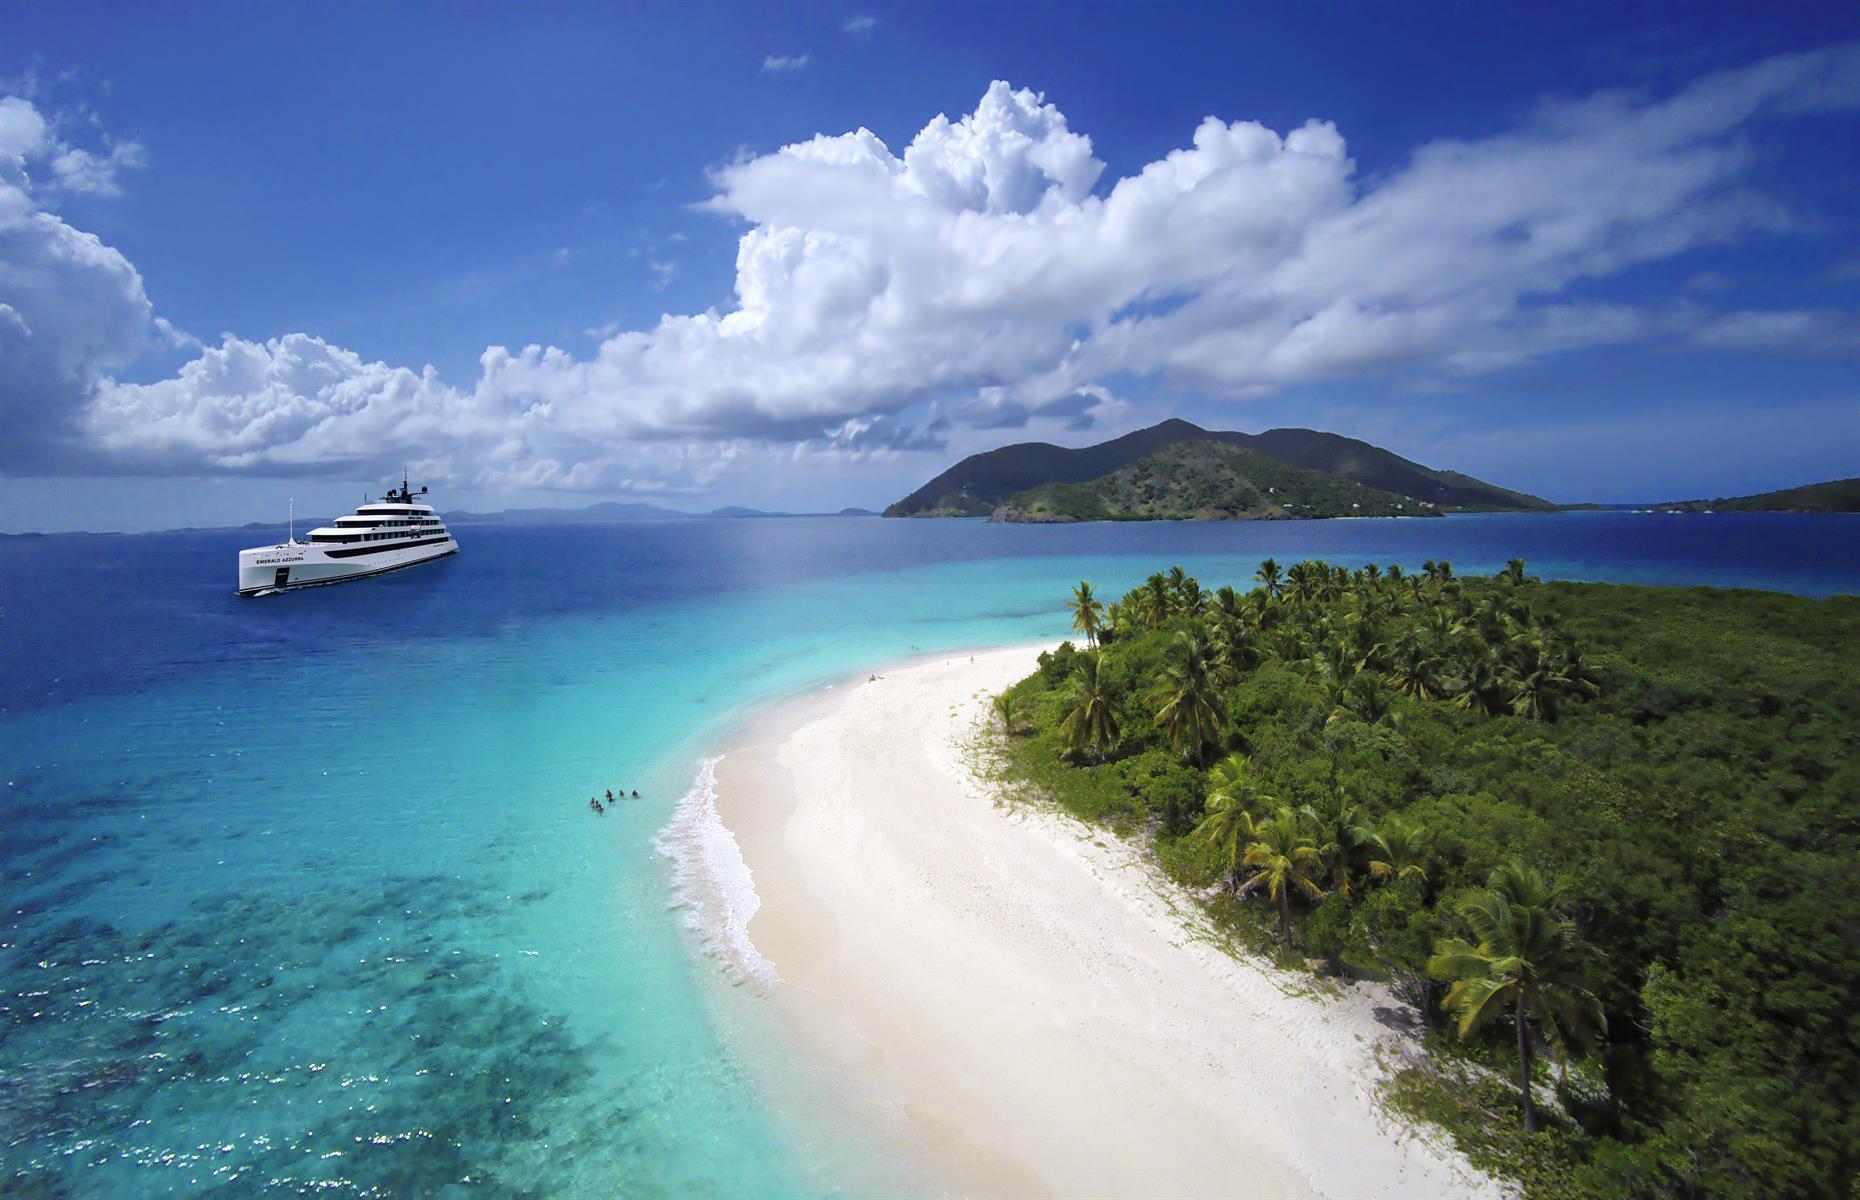 <p>Ever dreamt of exploring the Seychelles? A cruise is one of the best ways to do it, flitting from one island to another without having to worry about pricey seaplane transfers or chartering private boats. Typical stops on Seychelles cruises include the island of La Digue, where excursions provide the inside track on beautiful French architecture; and Praslin Island, with its pristine reef (the reason it’s a brilliant diving and snorkeling spot). Curieuse, meanwhile, is famous for its friendly giant tortoises and the world's only coco-de-mer forest.</p>